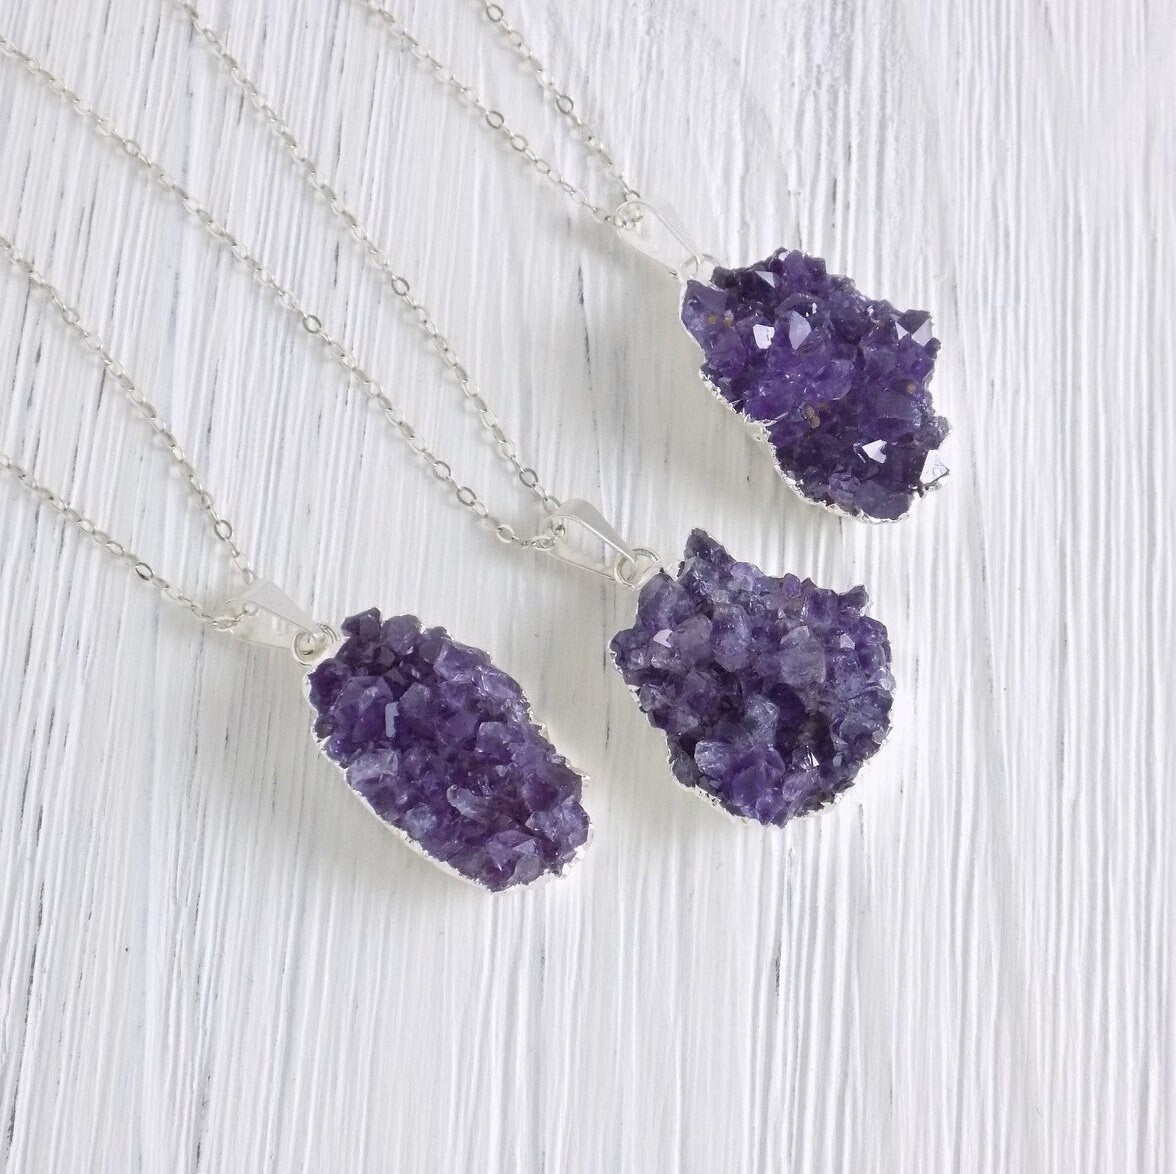 Small Amethyst Necklace Silver, Raw Purple Druzy Pendant, Gifts For Mom, Gift For Best Friend, R12-30